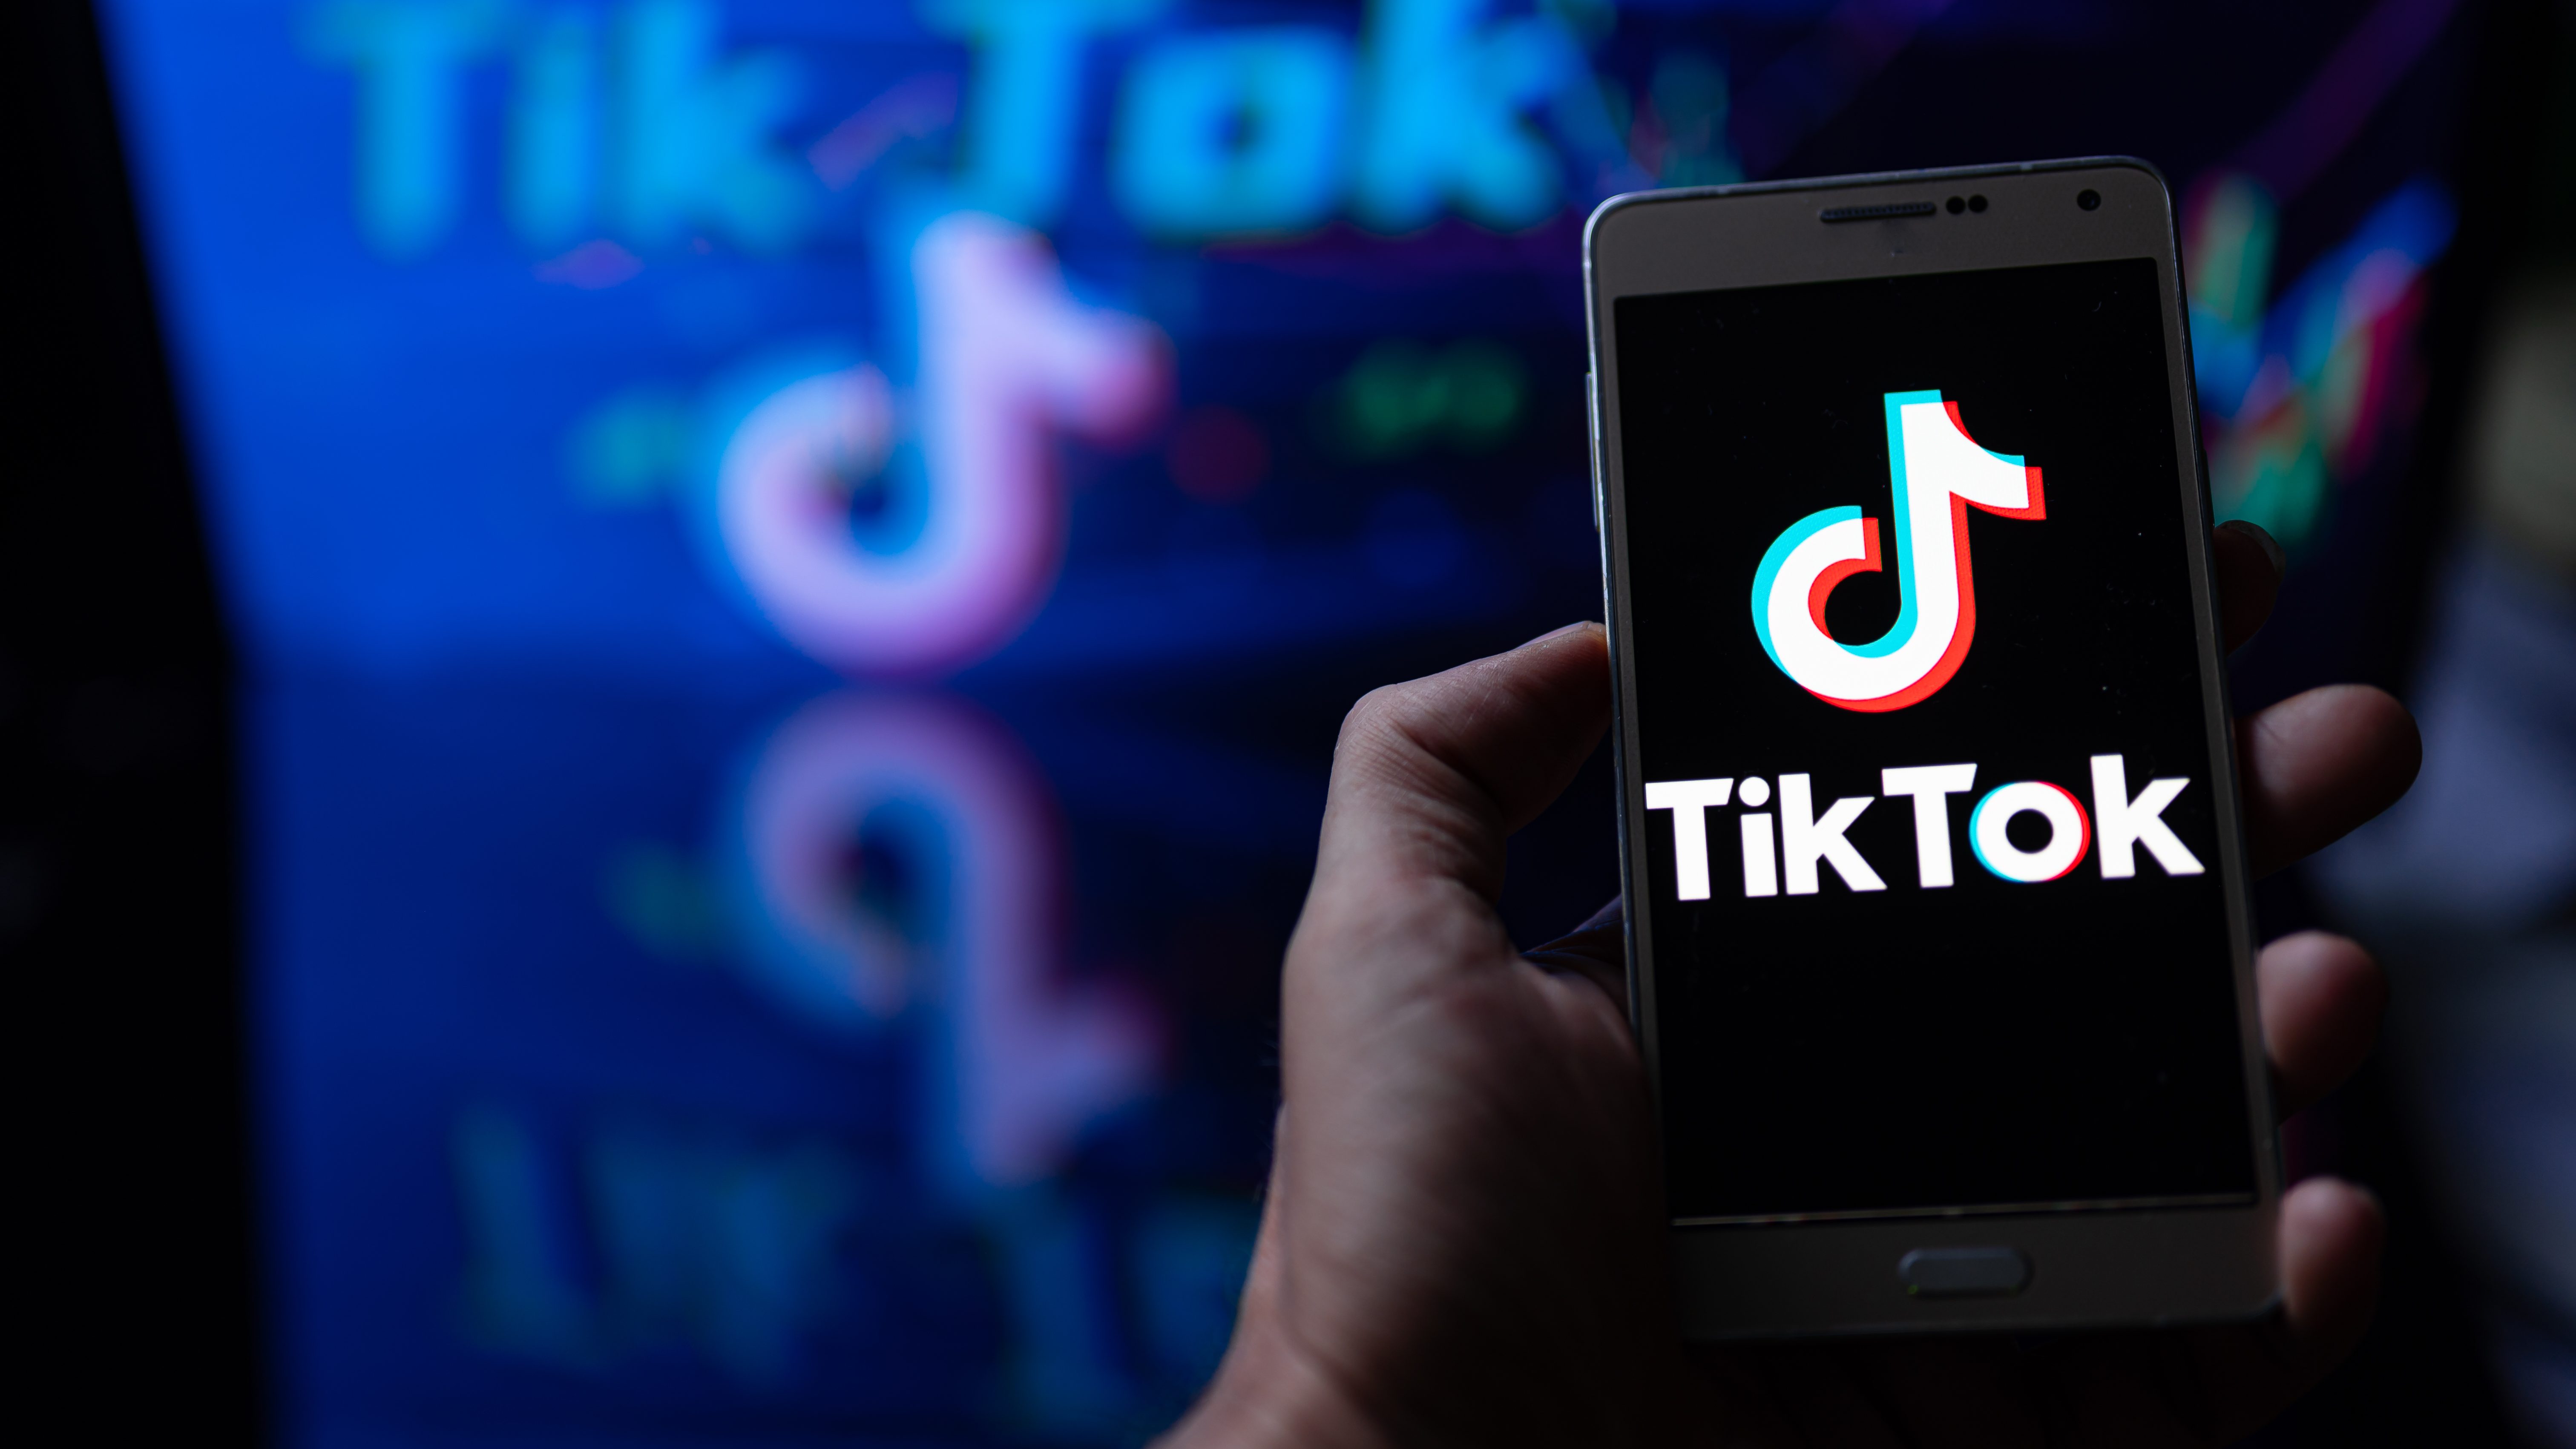 how-to-change-your-phone-number-on-tiktok-without-a-code